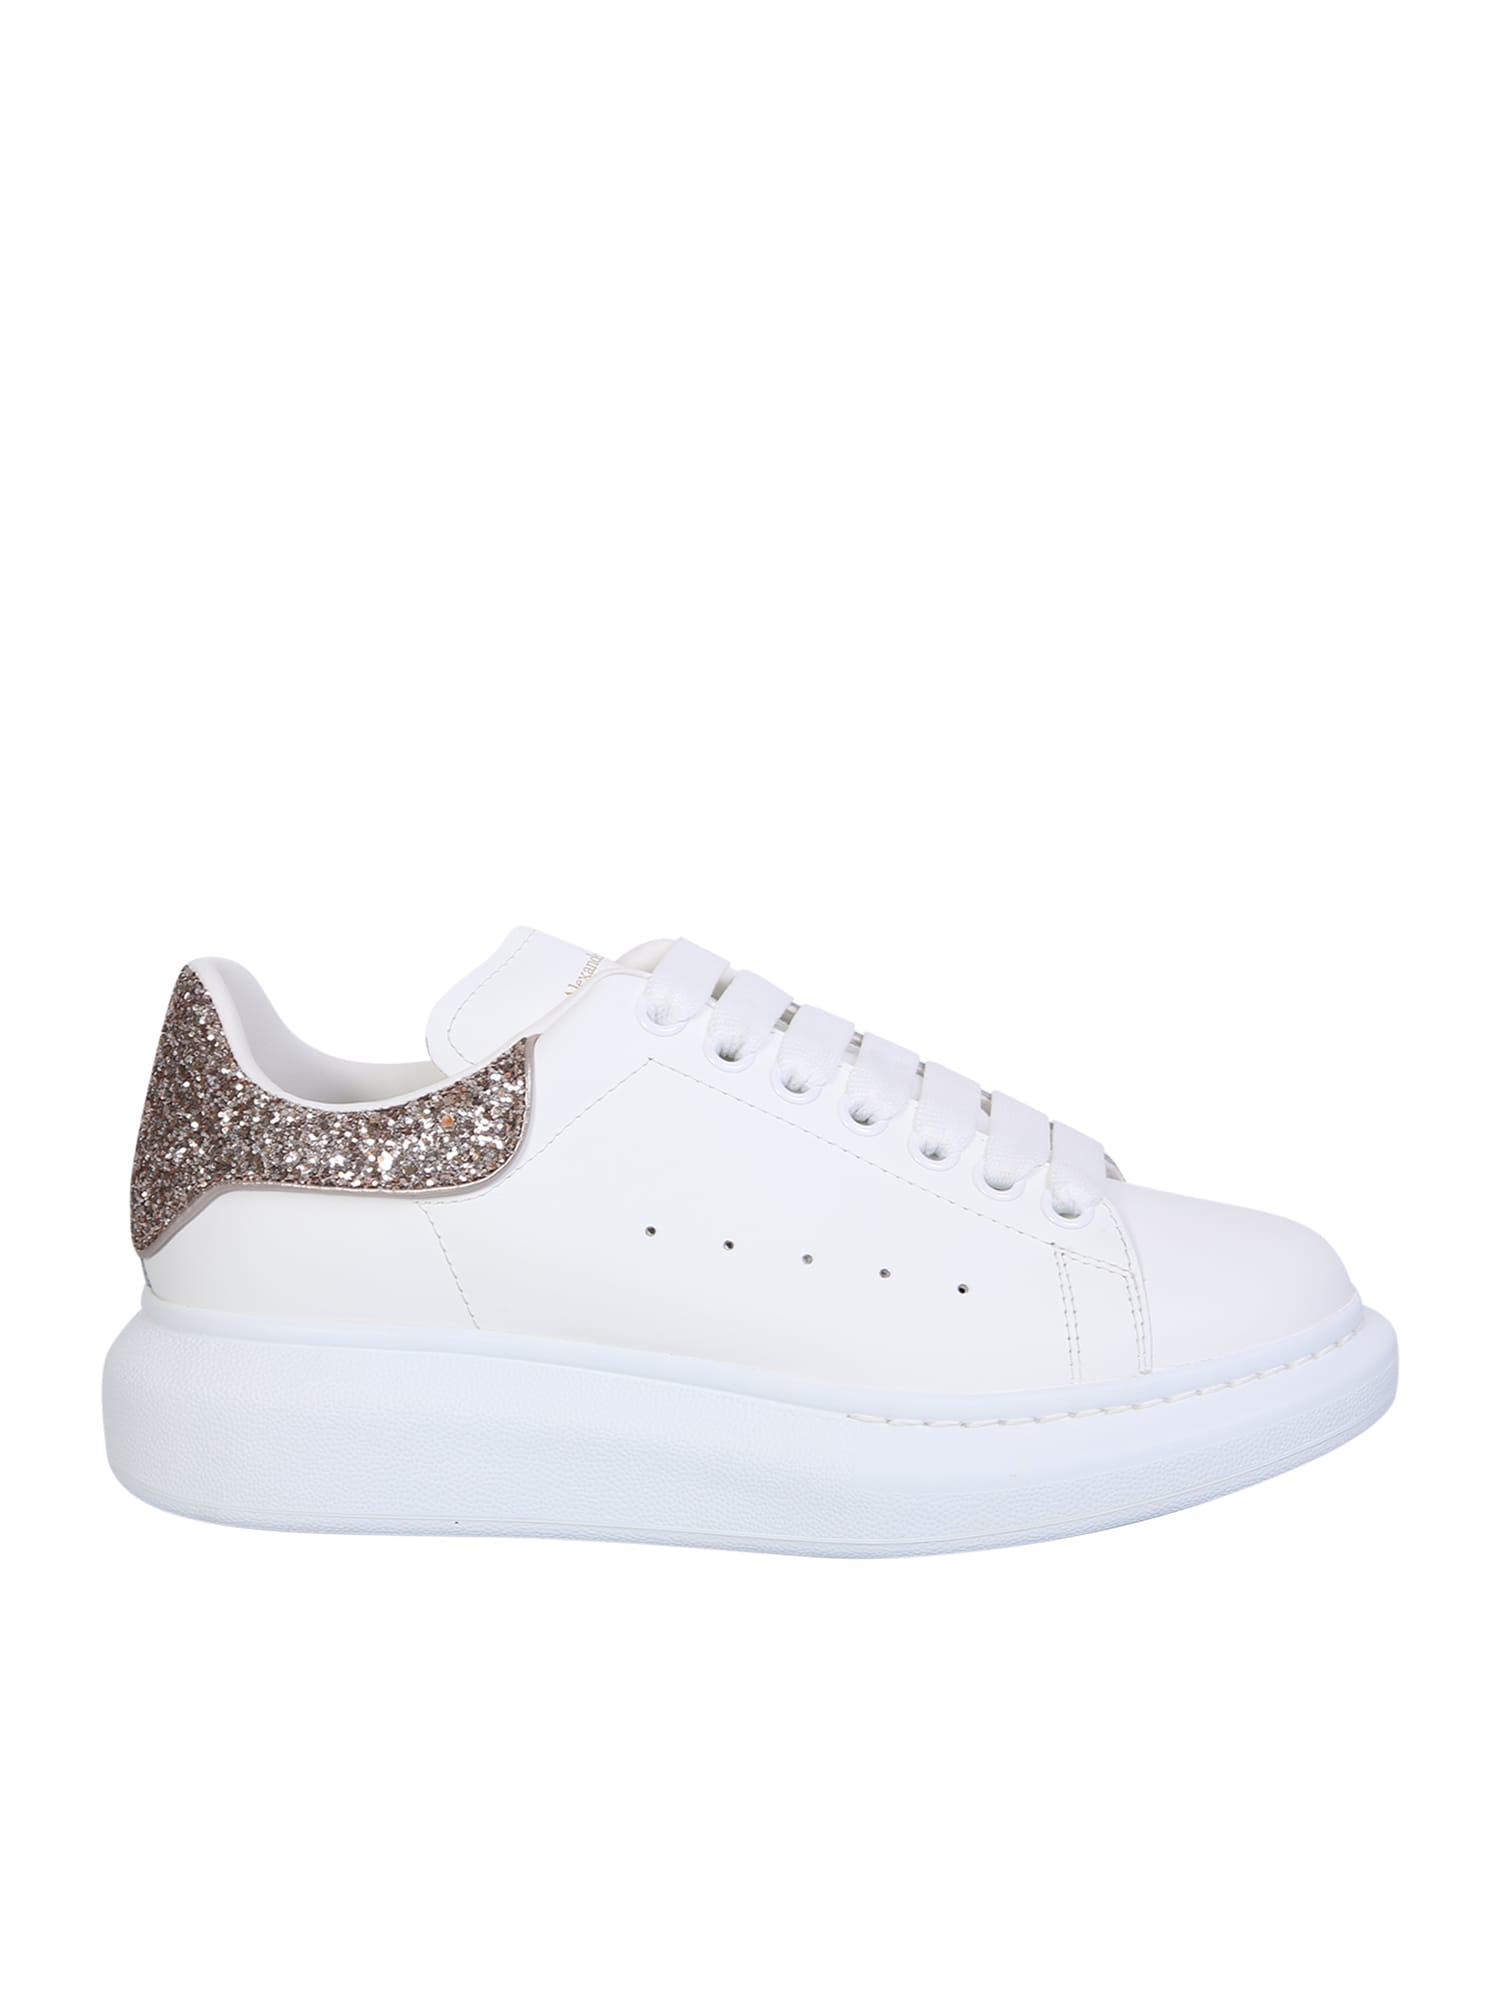 Alexander McQueen White And Glitter Oversize Sneakers